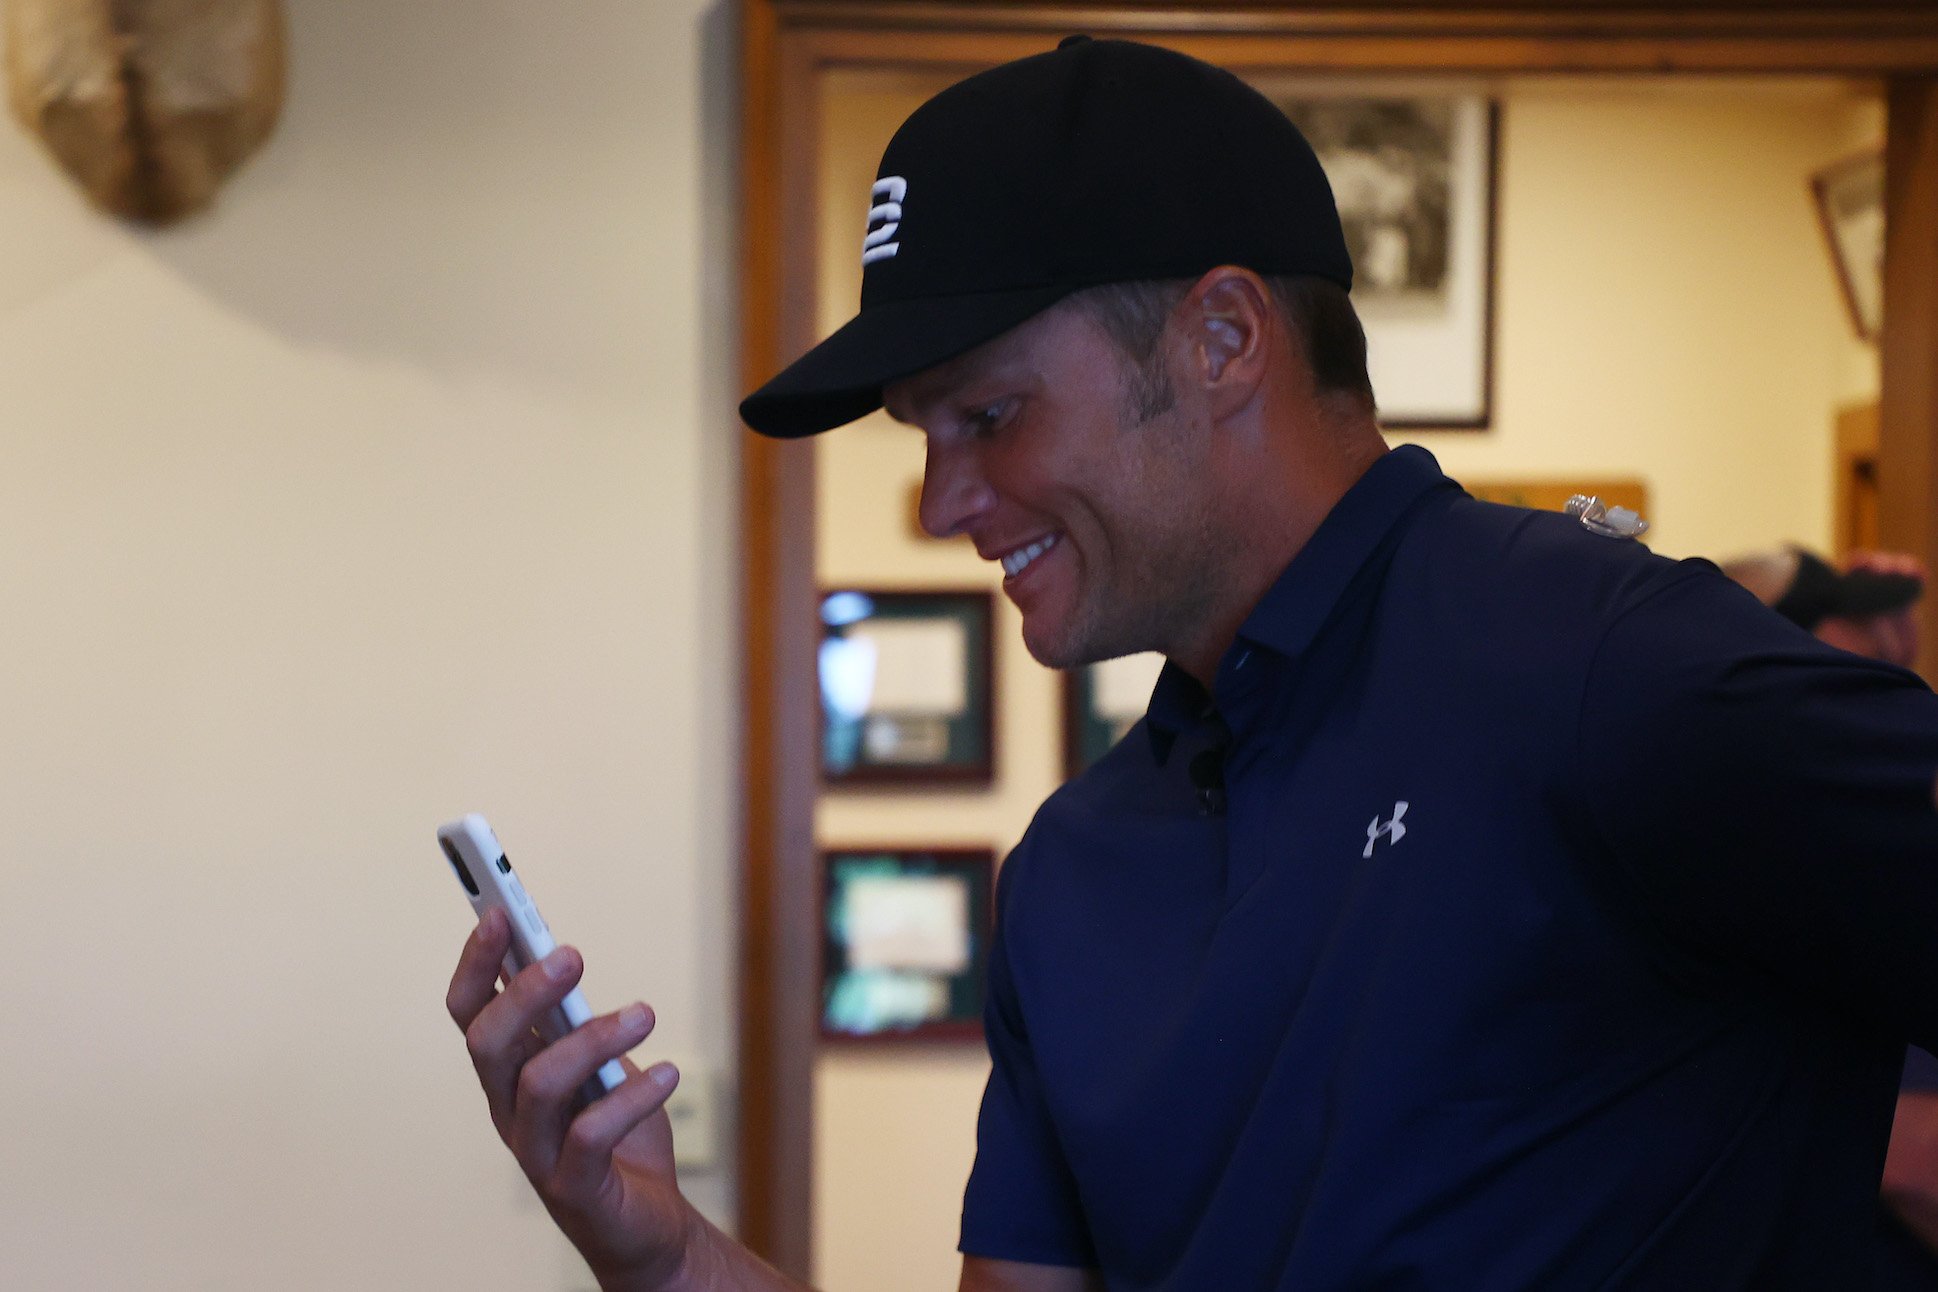 NFL player Tom Brady of the Tampa Bay Buccaneers waits out a weather delay in the clubhouse during The Match: Champions For Charity at Medalist Golf Club